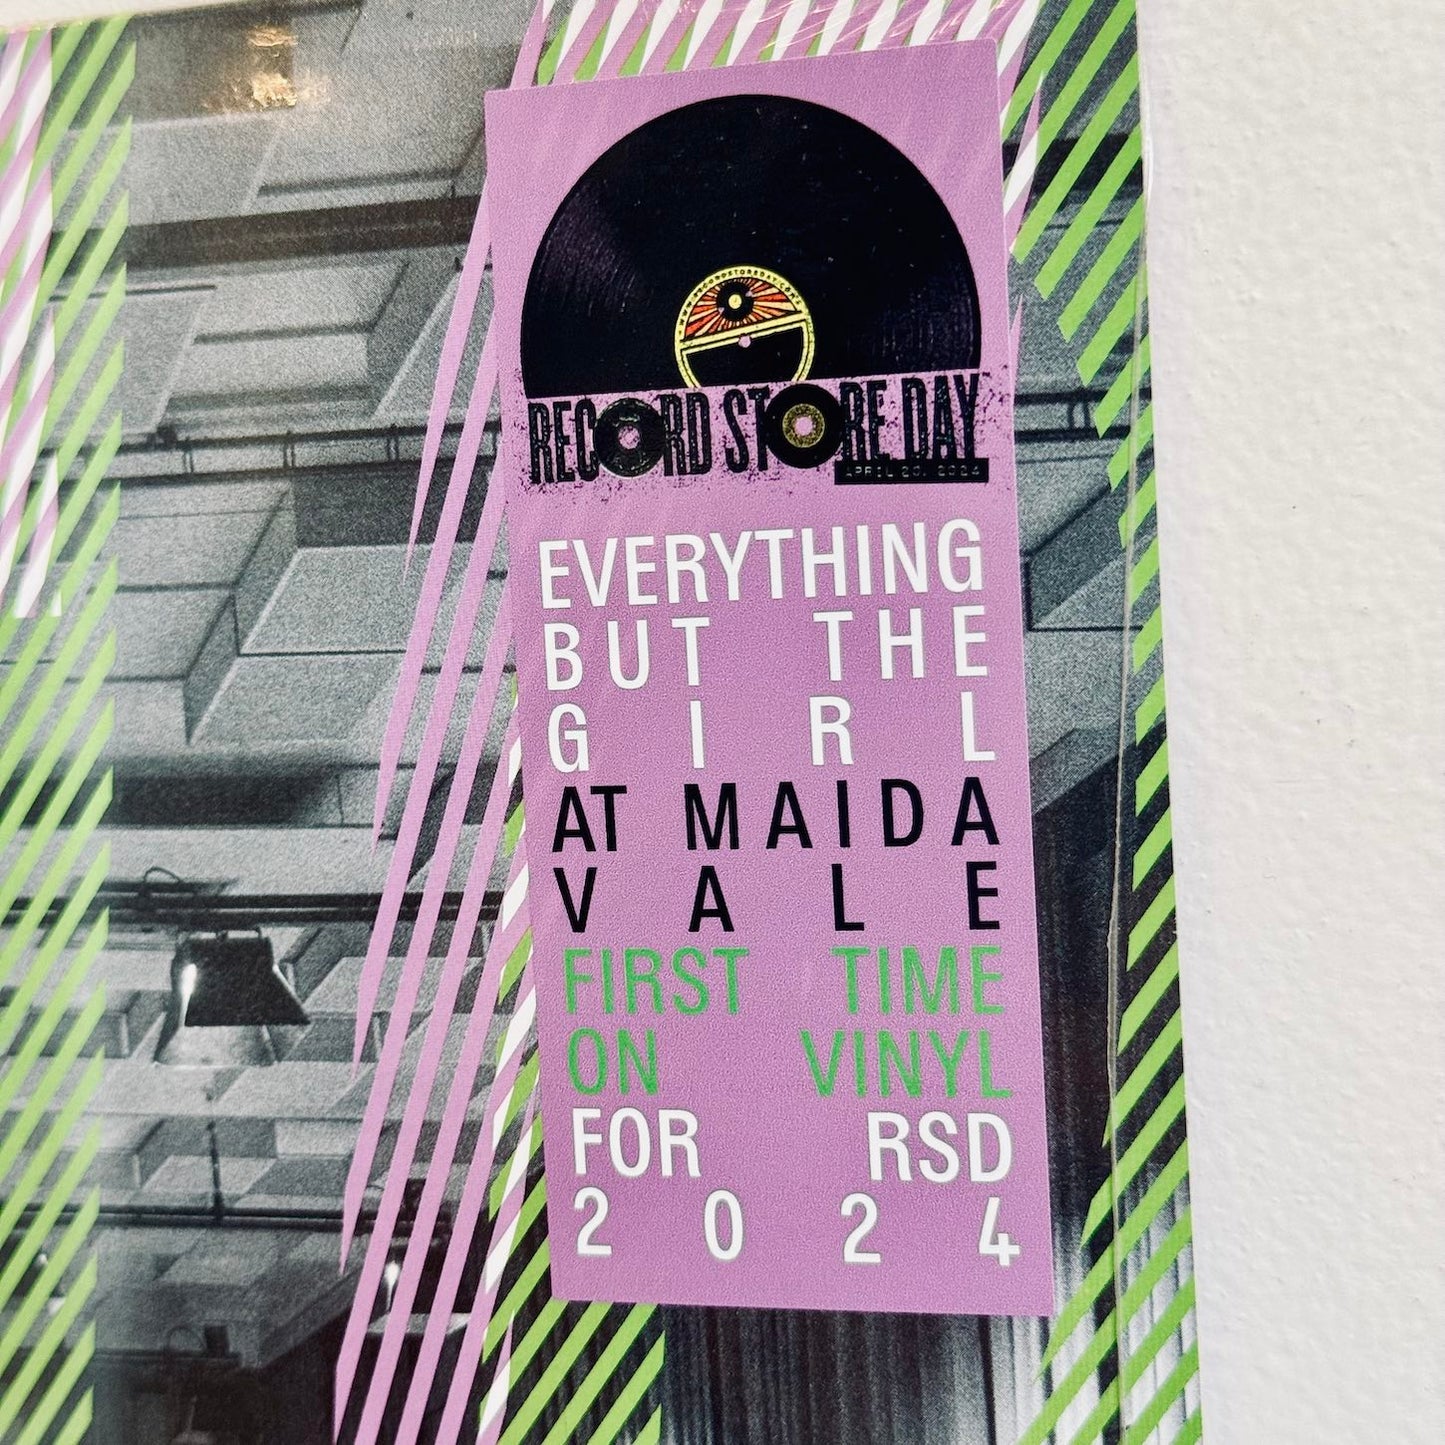 RSD2024 - EVERYTHING BUT THE GIRL - AT MAIDA VALE. LP [First-Time Pressing / Edition of 2200]